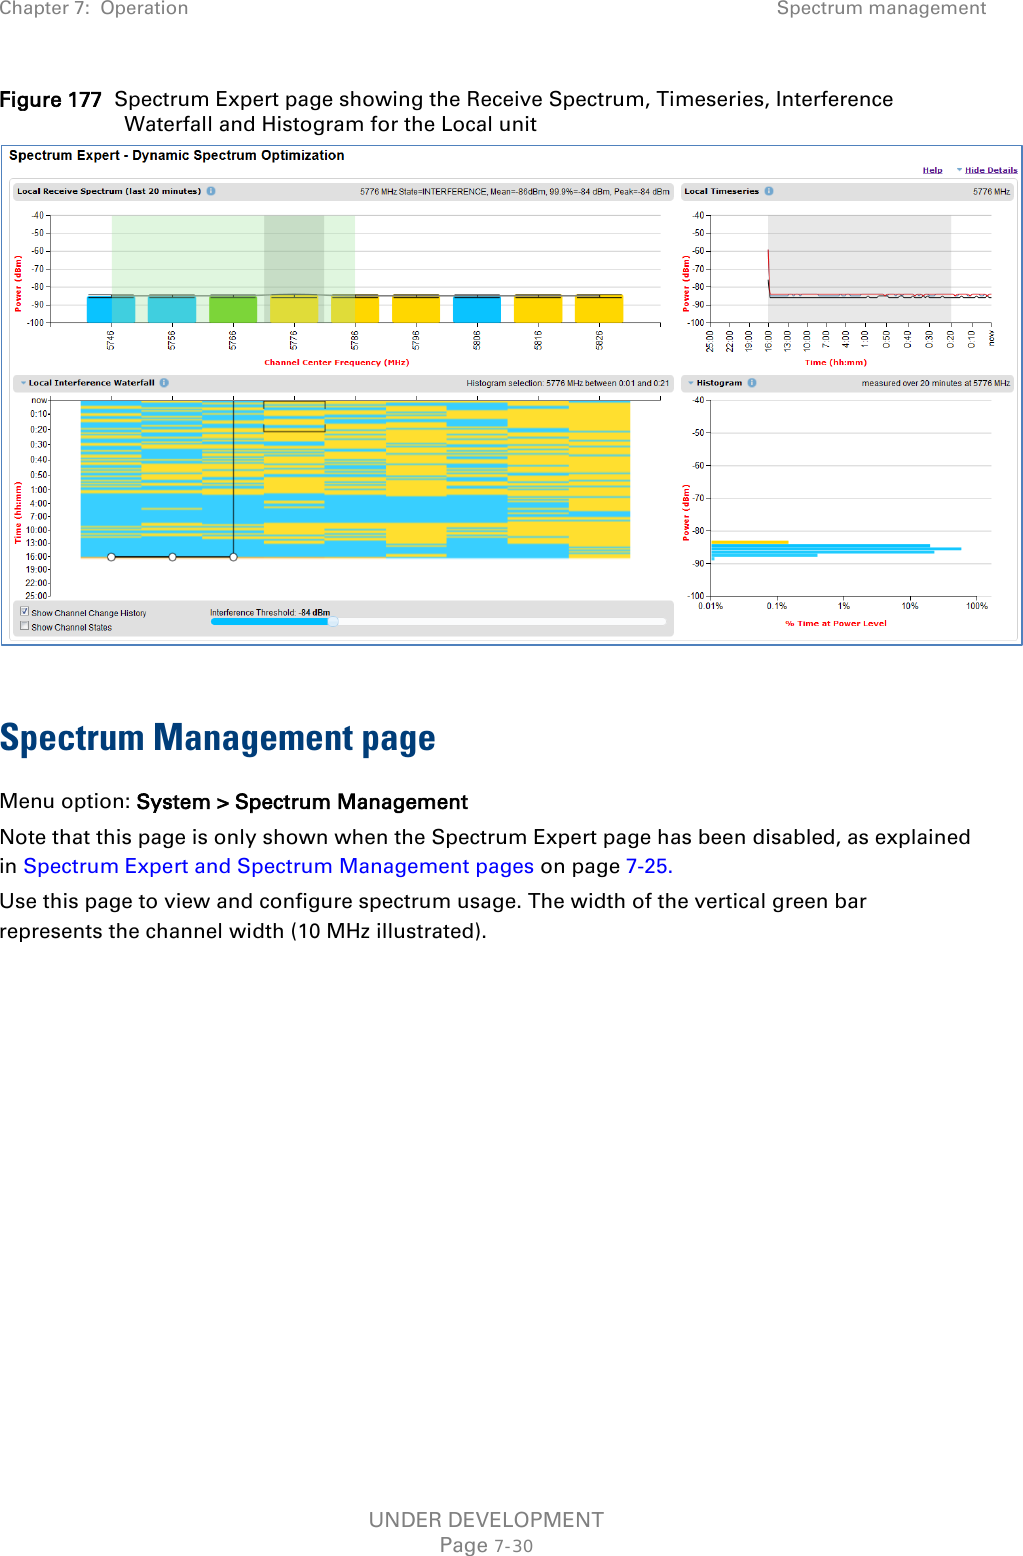 Chapter 7:  Operation Spectrum management  Figure 177  Spectrum Expert page showing the Receive Spectrum, Timeseries, Interference Waterfall and Histogram for the Local unit   Spectrum Management page Menu option: System &gt; Spectrum Management Note that this page is only shown when the Spectrum Expert page has been disabled, as explained in Spectrum Expert and Spectrum Management pages on page 7-25. Use this page to view and configure spectrum usage. The width of the vertical green bar represents the channel width (10 MHz illustrated). UNDER DEVELOPMENT Page 7-30 